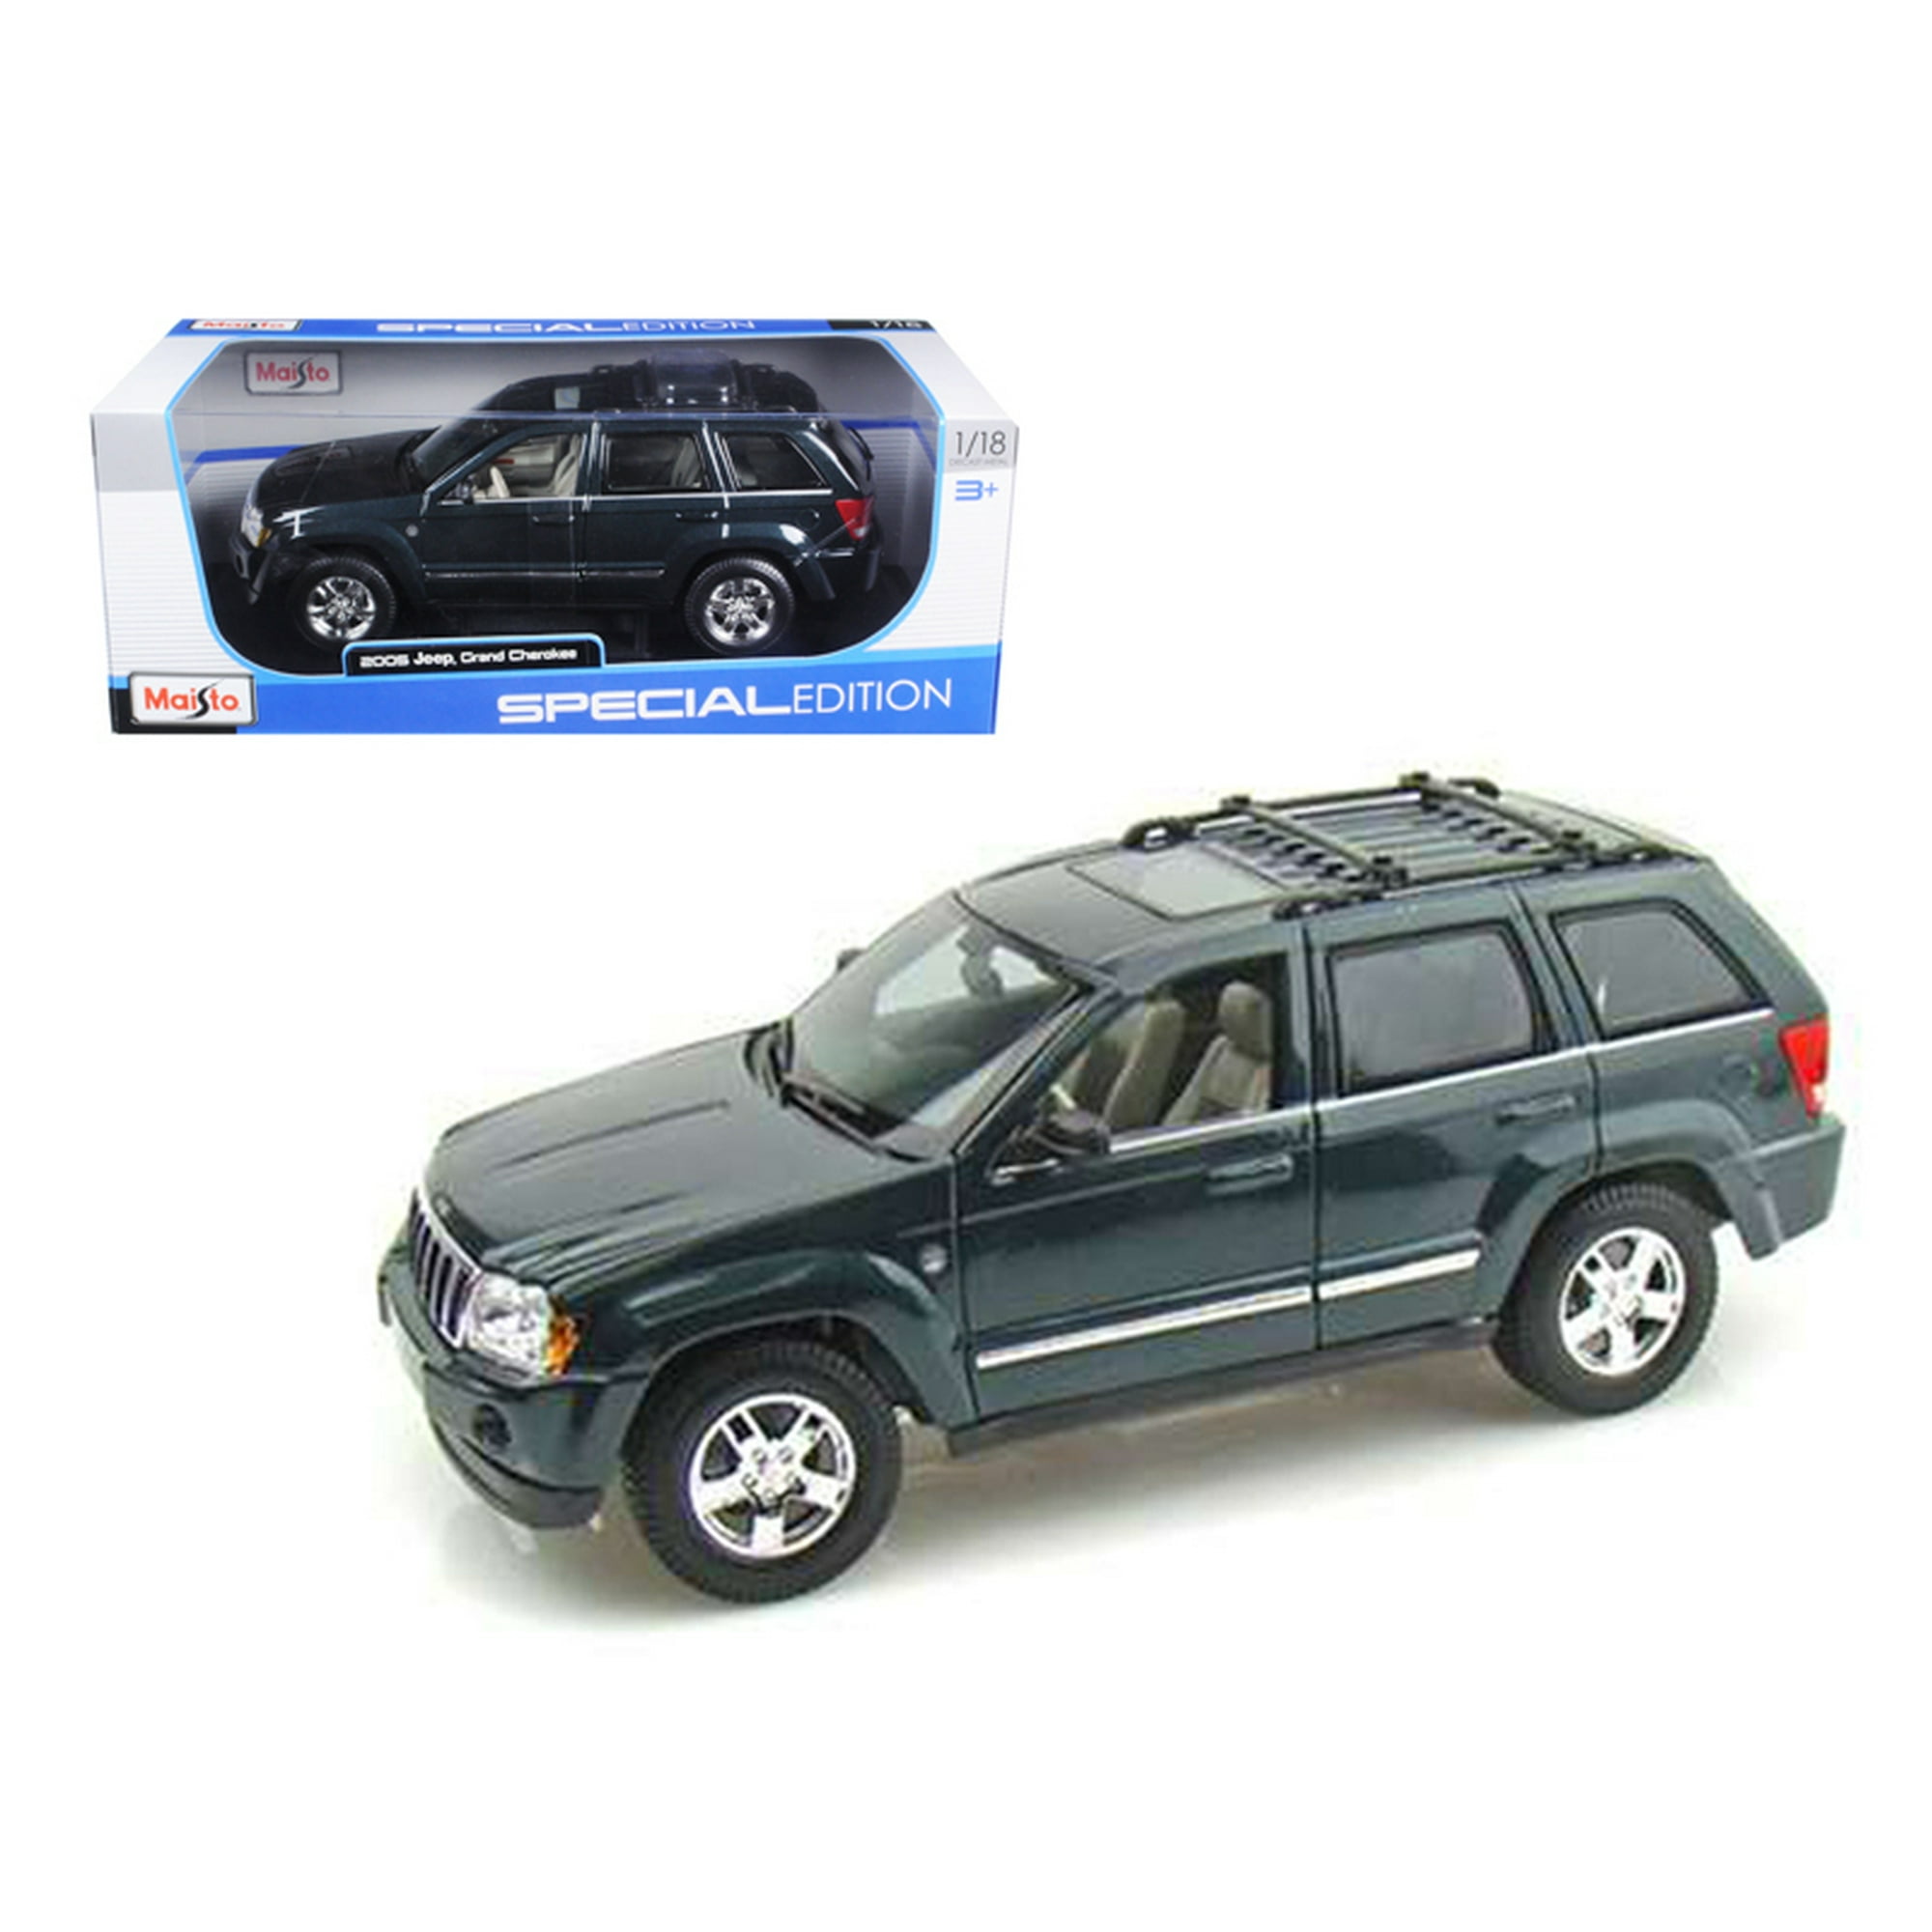 Jeep Grand Cherokee Model Cars Toys 1:24 Collection Alloy Diecast Gold New